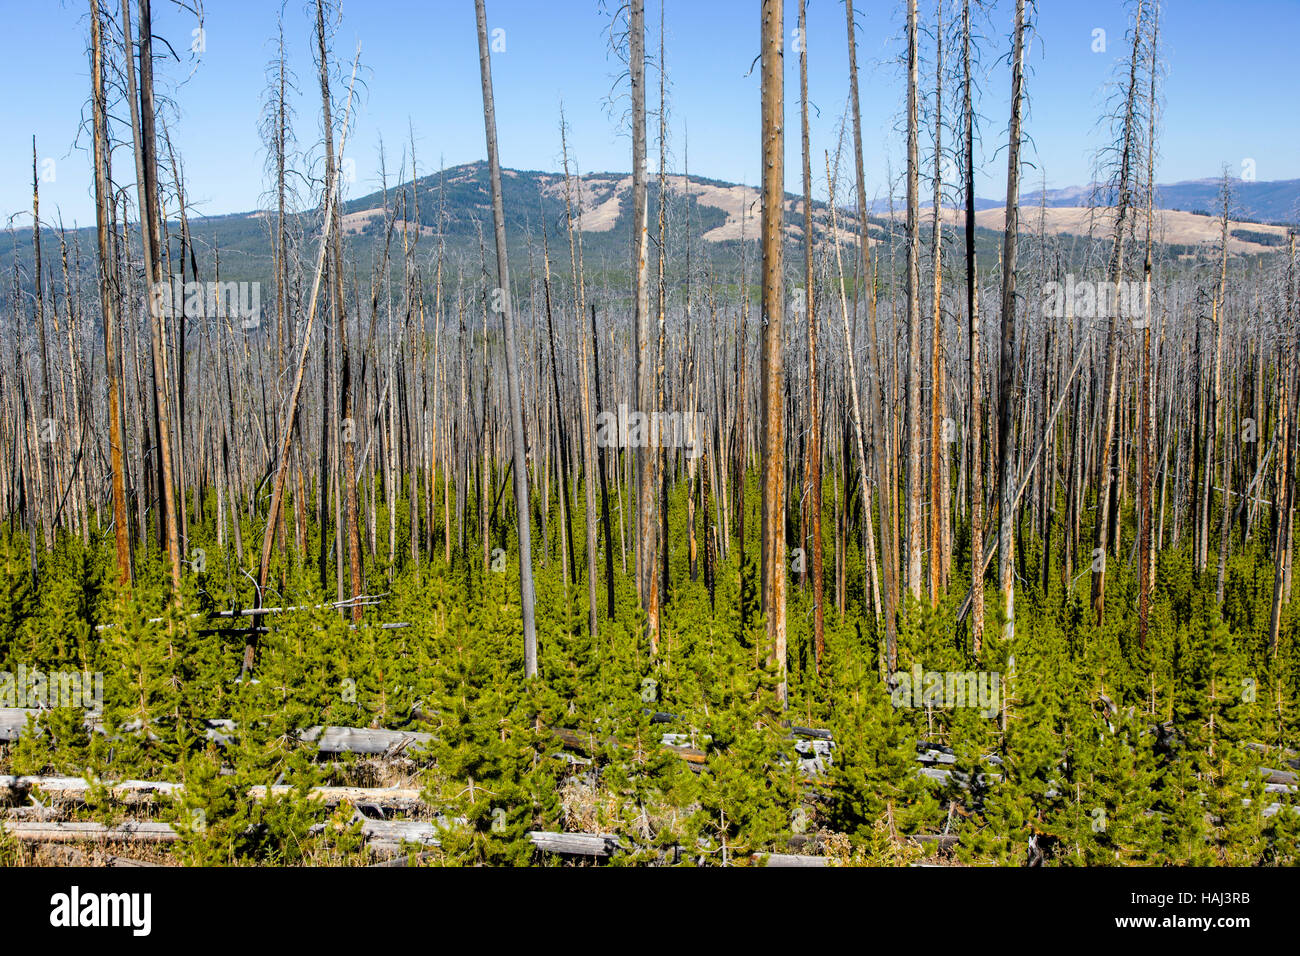 Regeneration of trees that burned in forest fires, near Dunraven Pass, Yellowstone National Park; Wyoming; USA Stock Photo